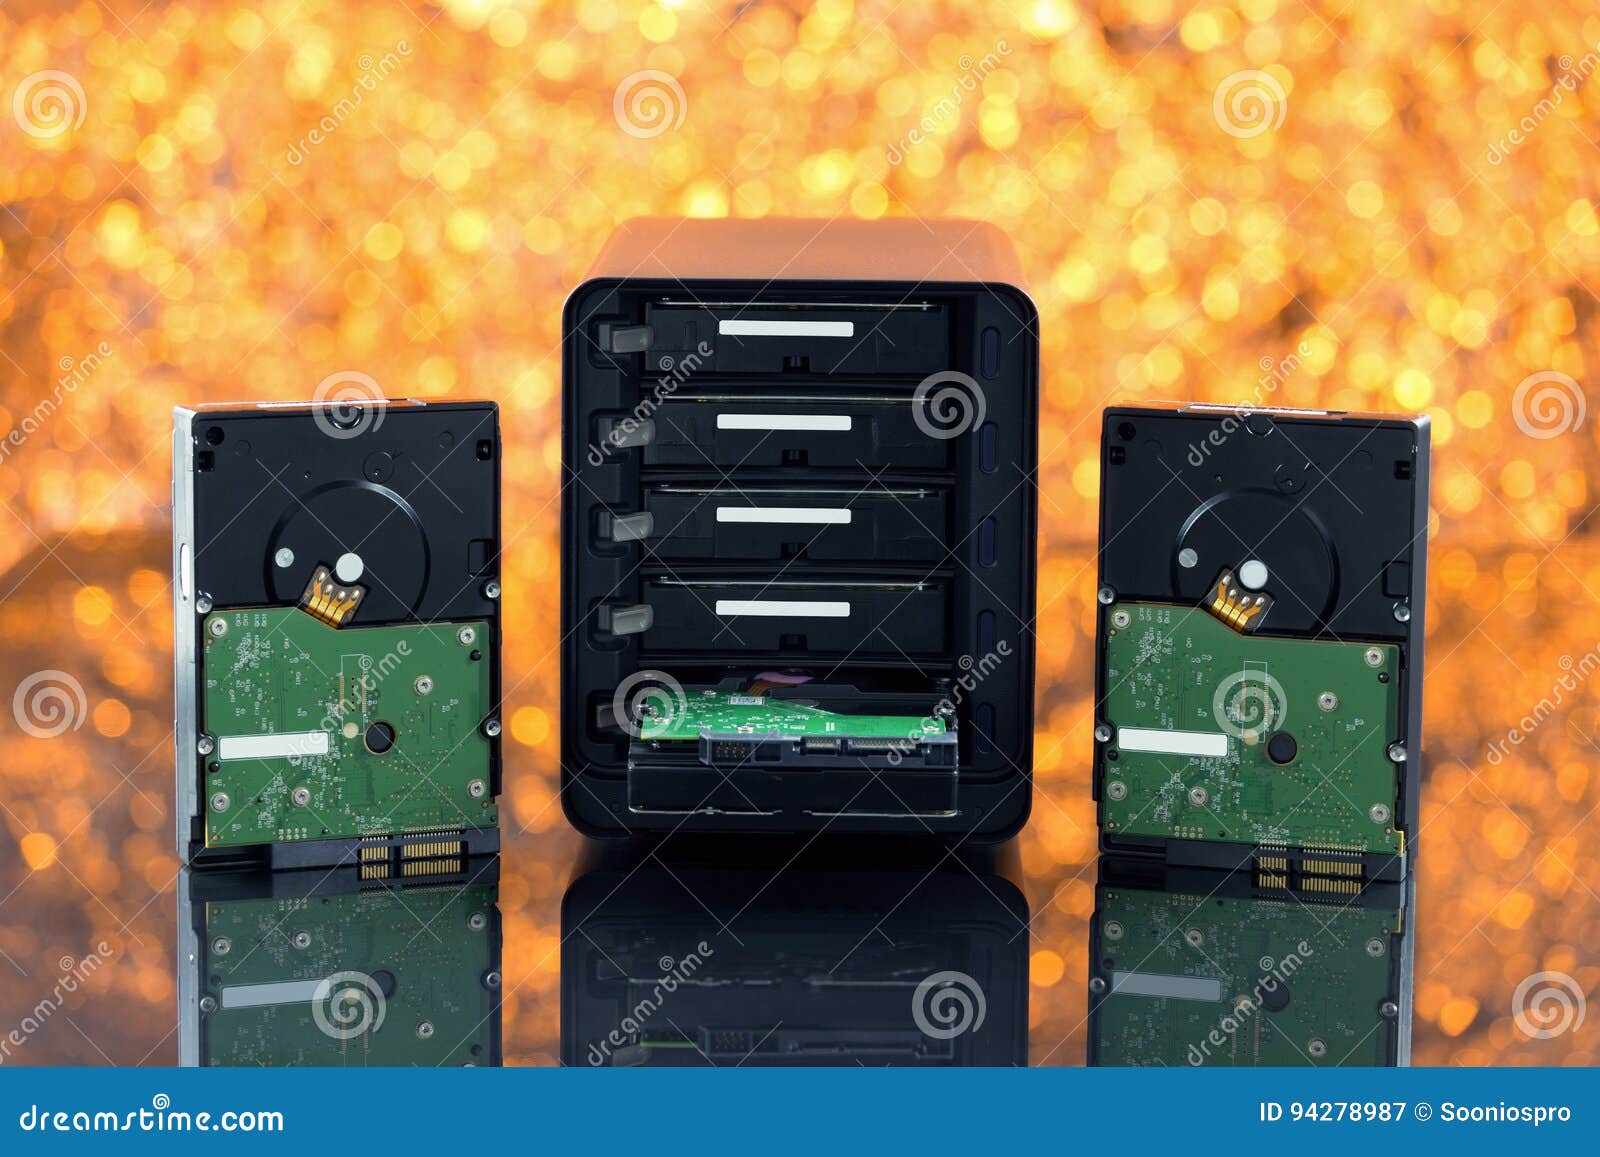 nas, storage connected to the network